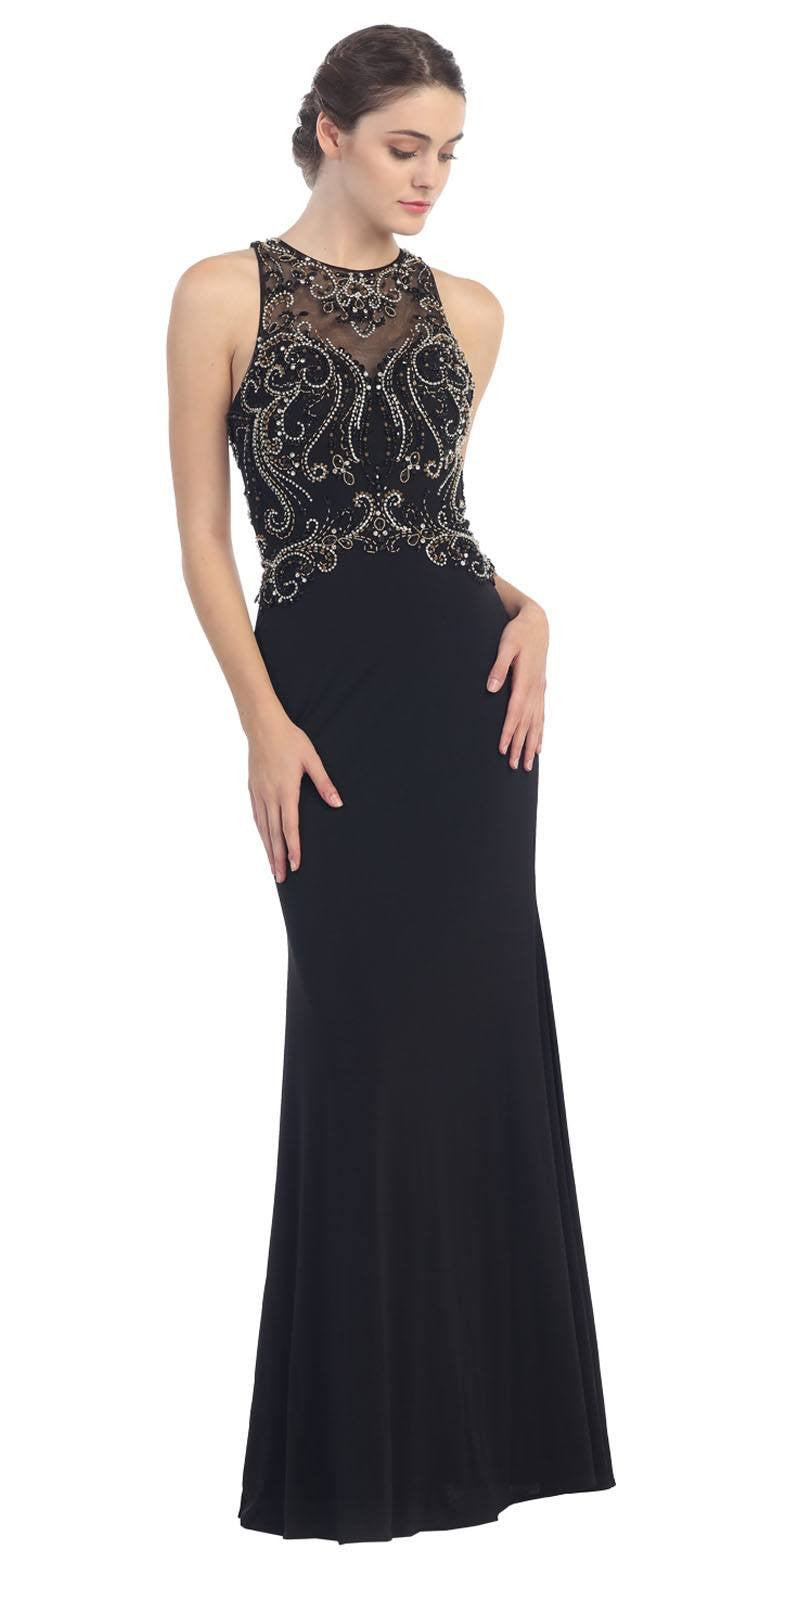 Grecian Inspired Gown Black Floor Length Illusion Neck Beads